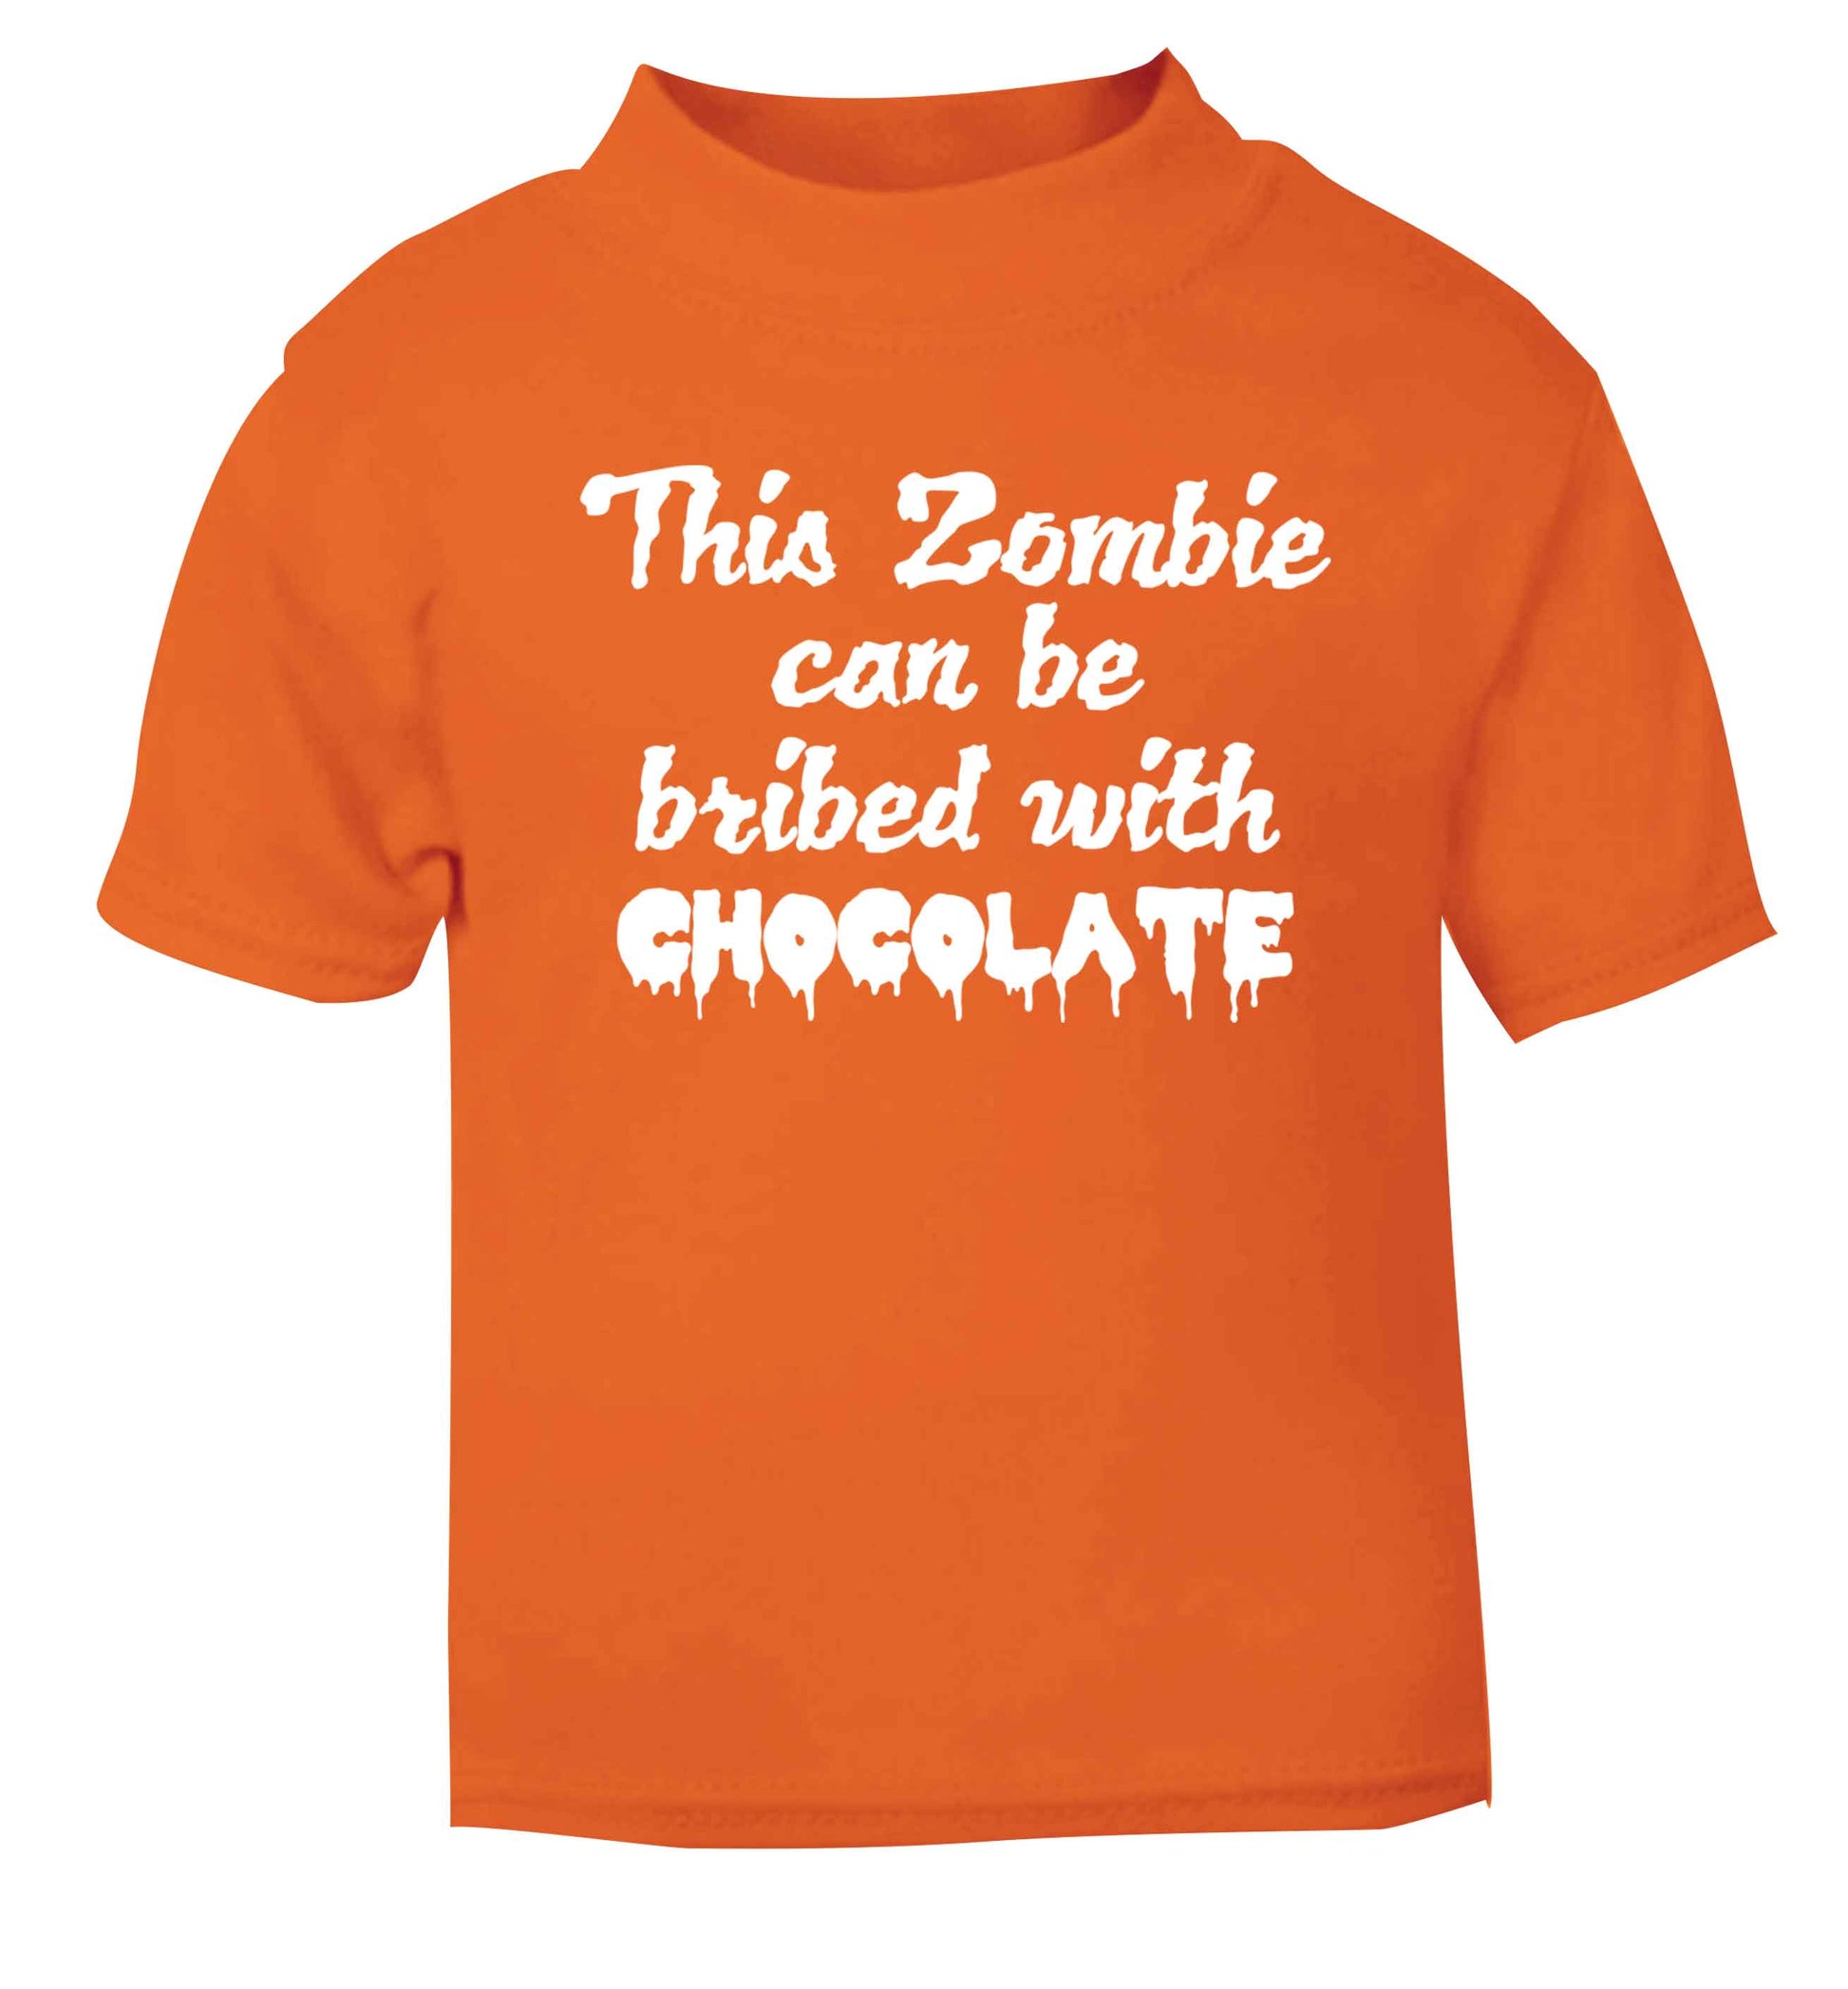 This zombie can be bribed with chocolate orange baby toddler Tshirt 2 Years